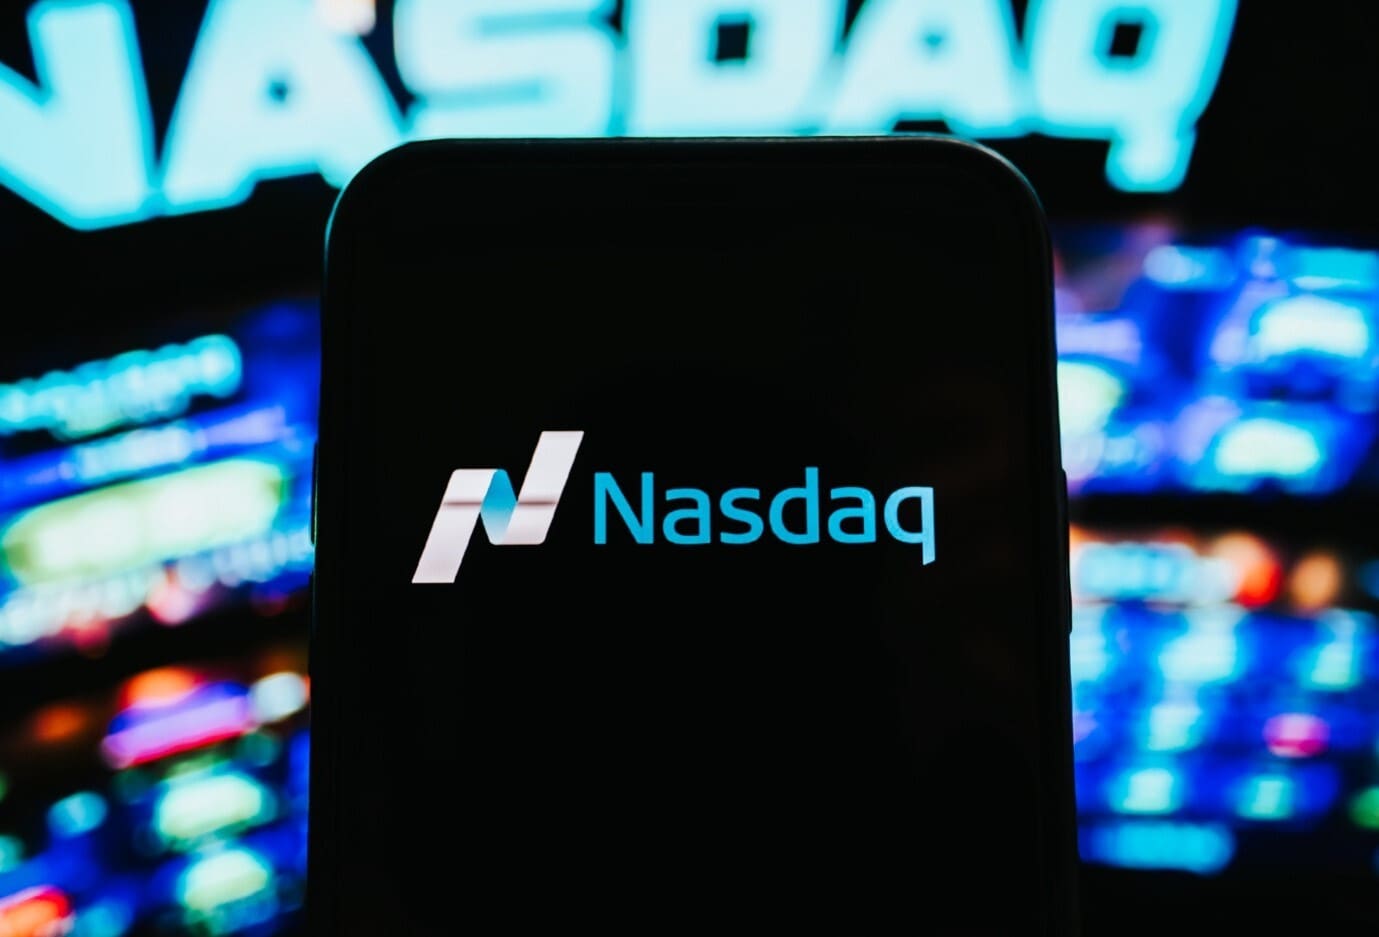 A smartphone displays the Nasdaq logo against a background of financial charts.